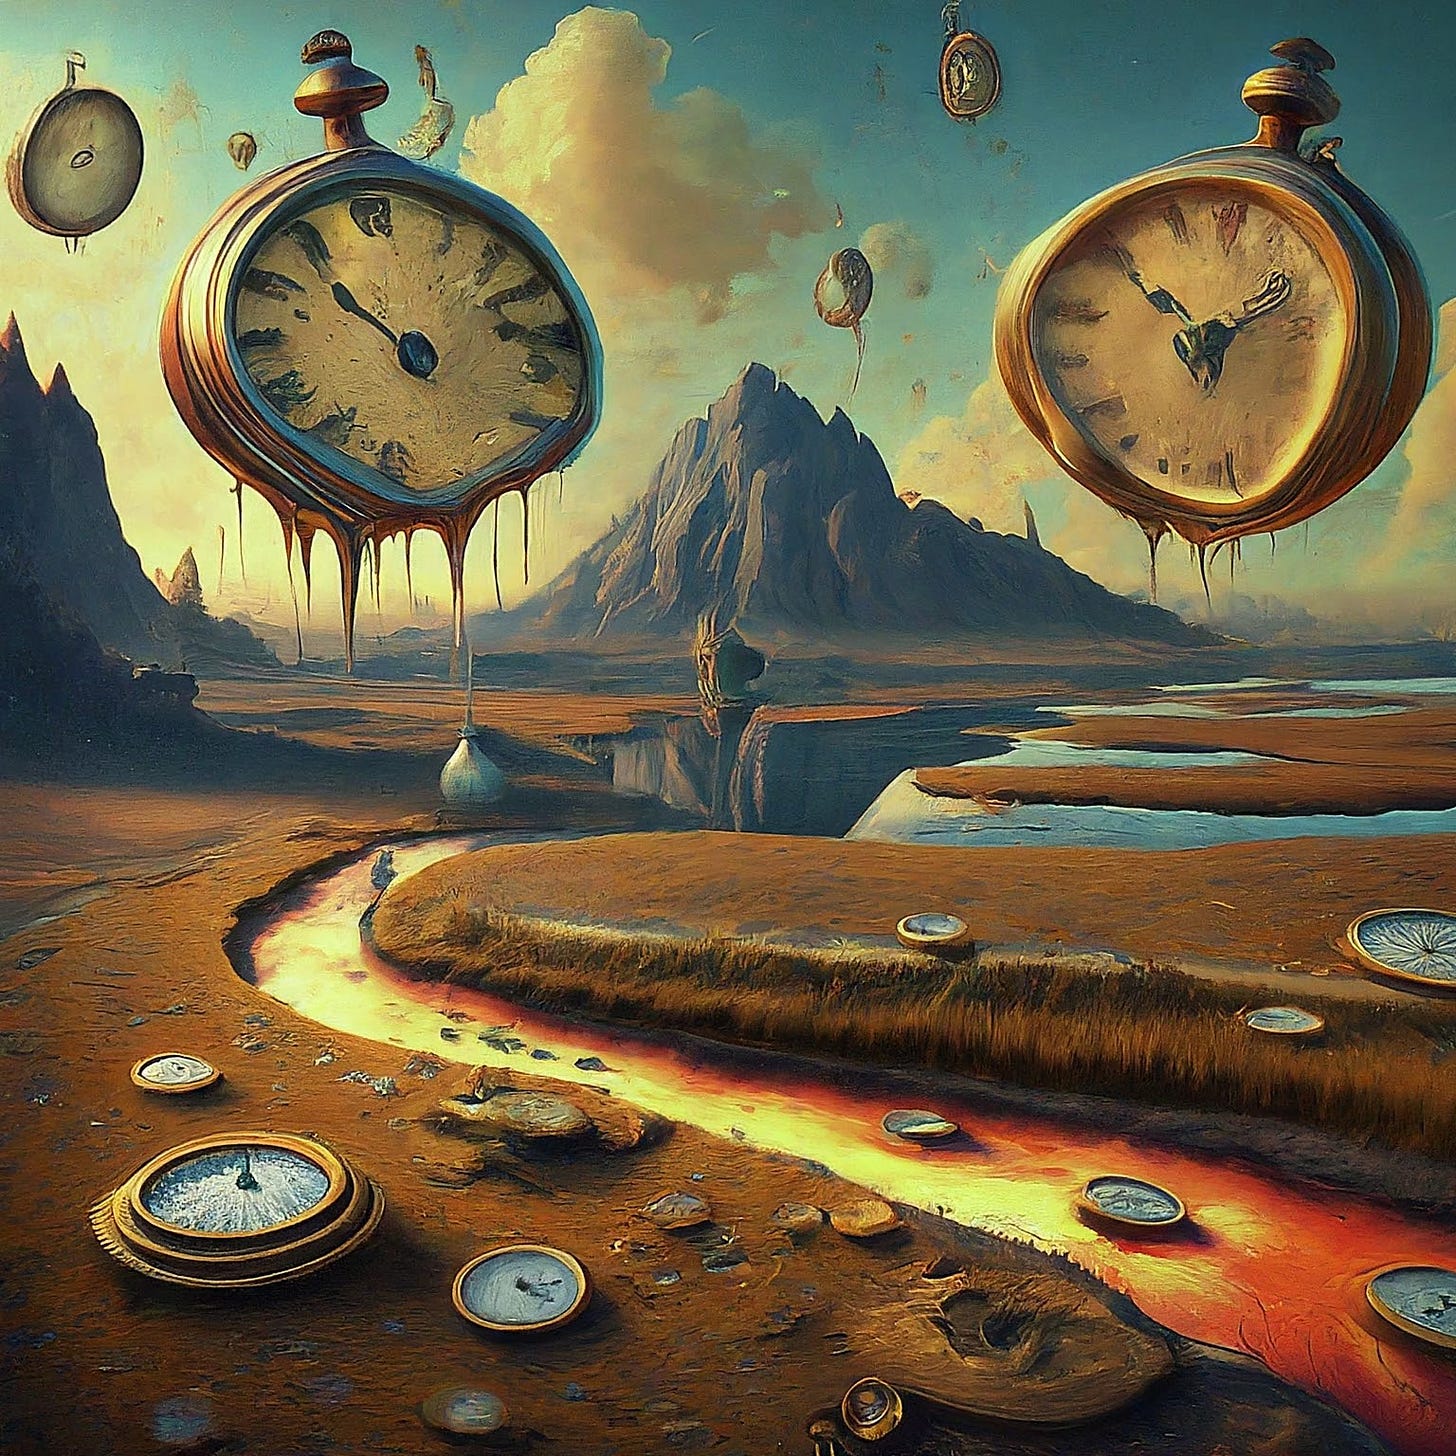 Melting clocks in front a volcano and over a river of lava